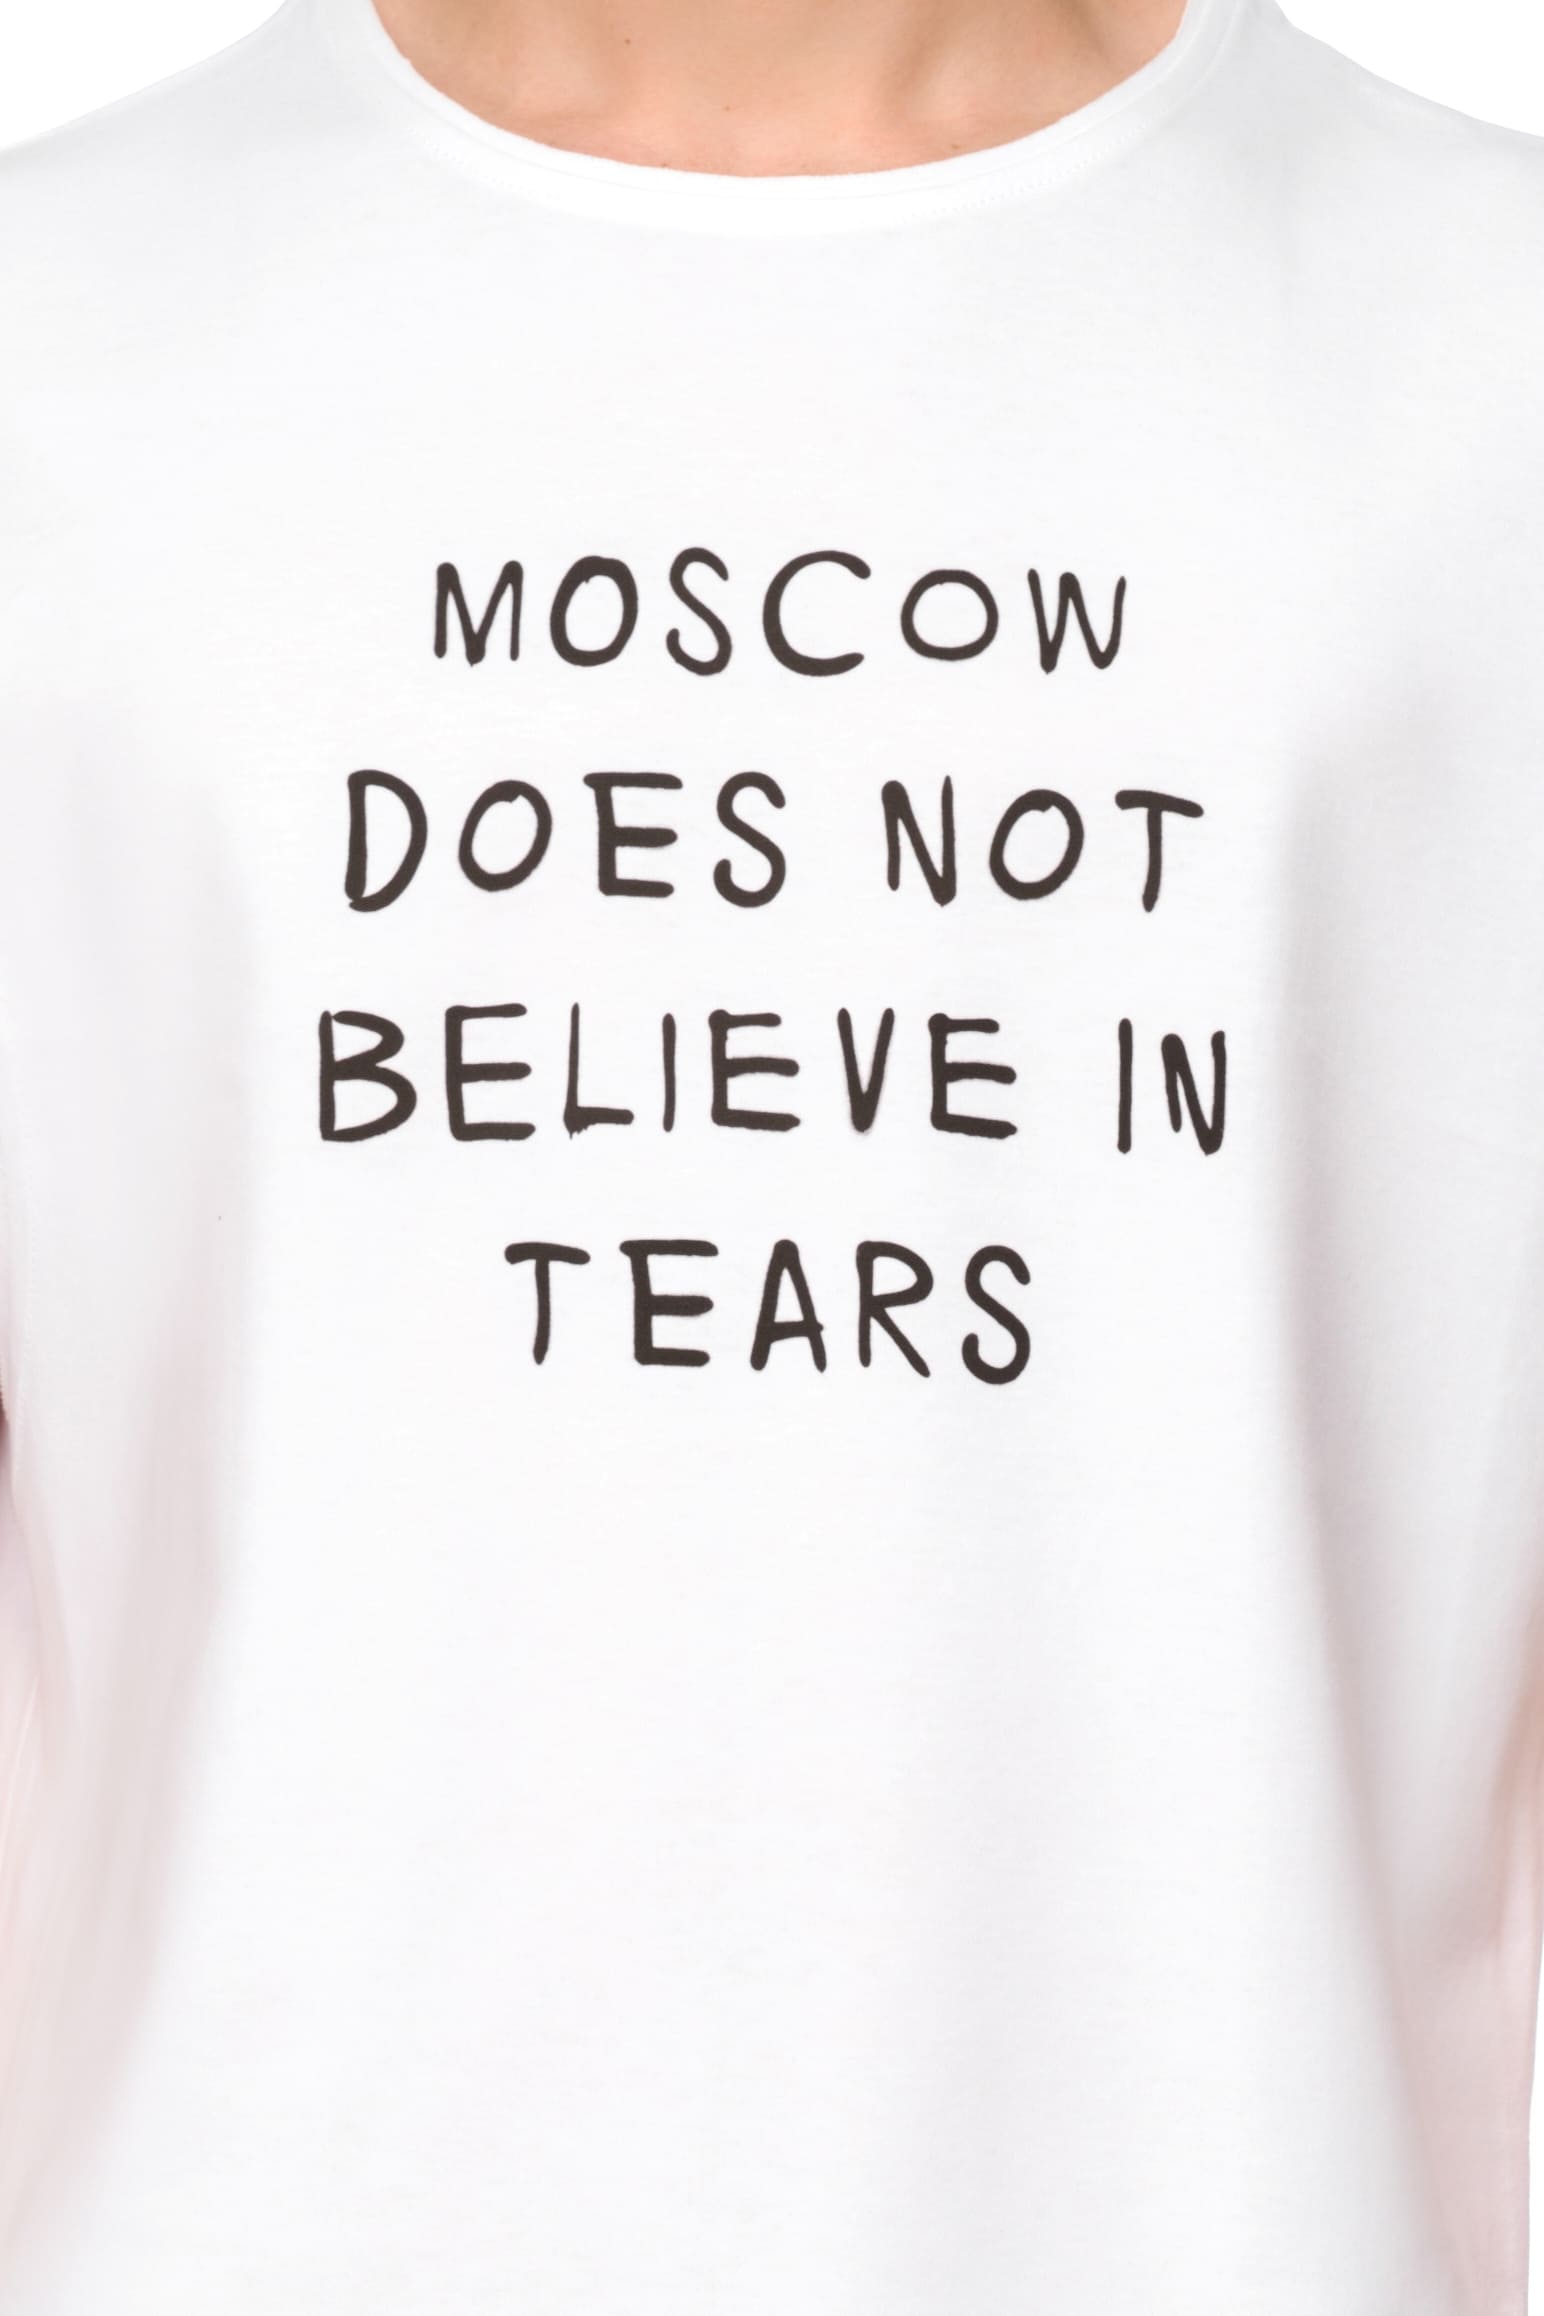 Moscow does not believe in tears Top